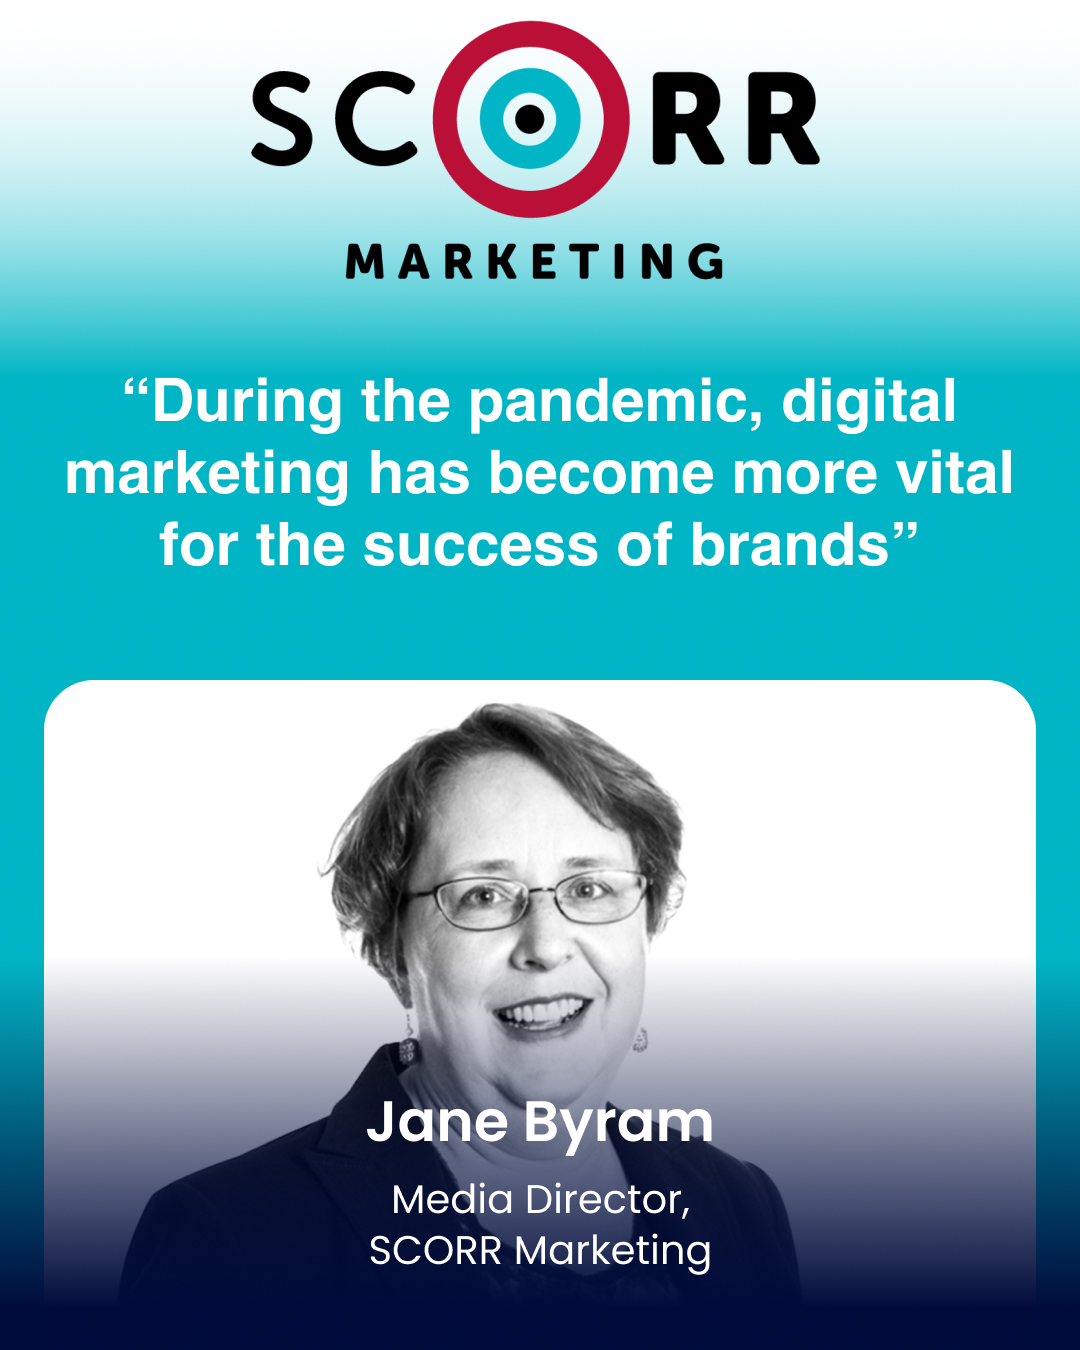 “During the pandemic, digital marketing has become more vital for the success of brands”